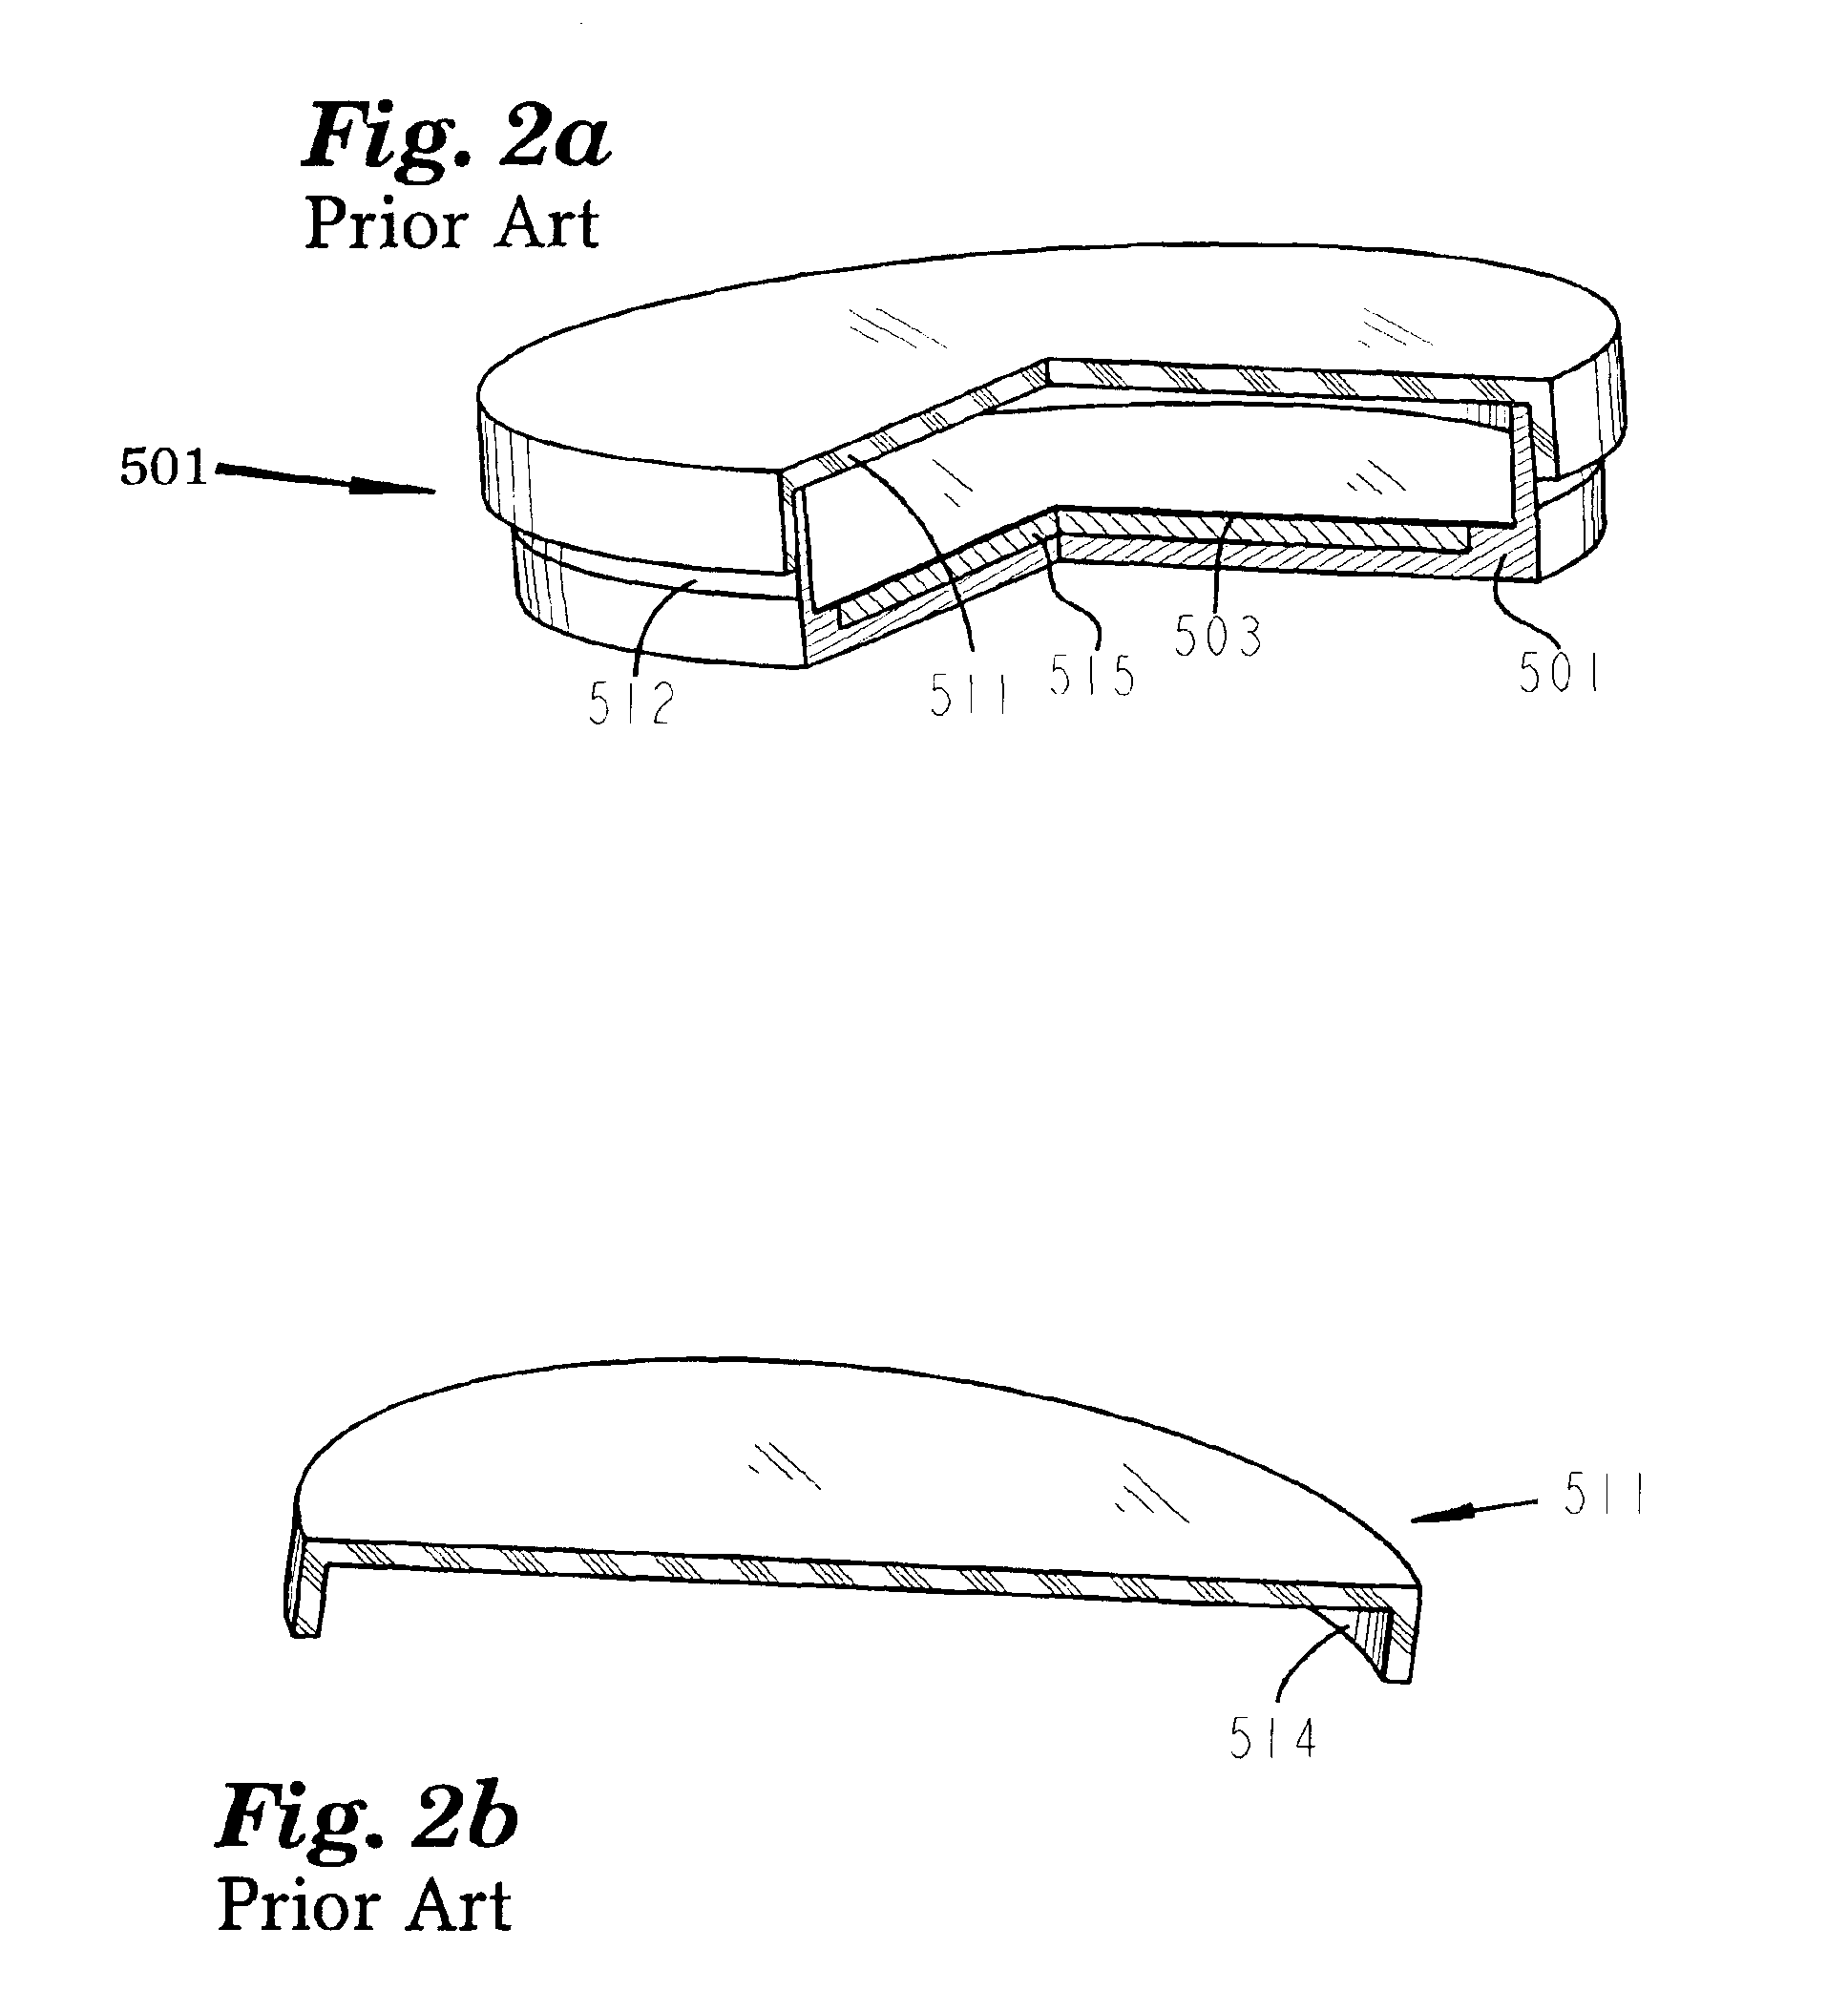 Disposable vacuum filtration apparatus capable of detecting microorganisms and particulates in liquid samples